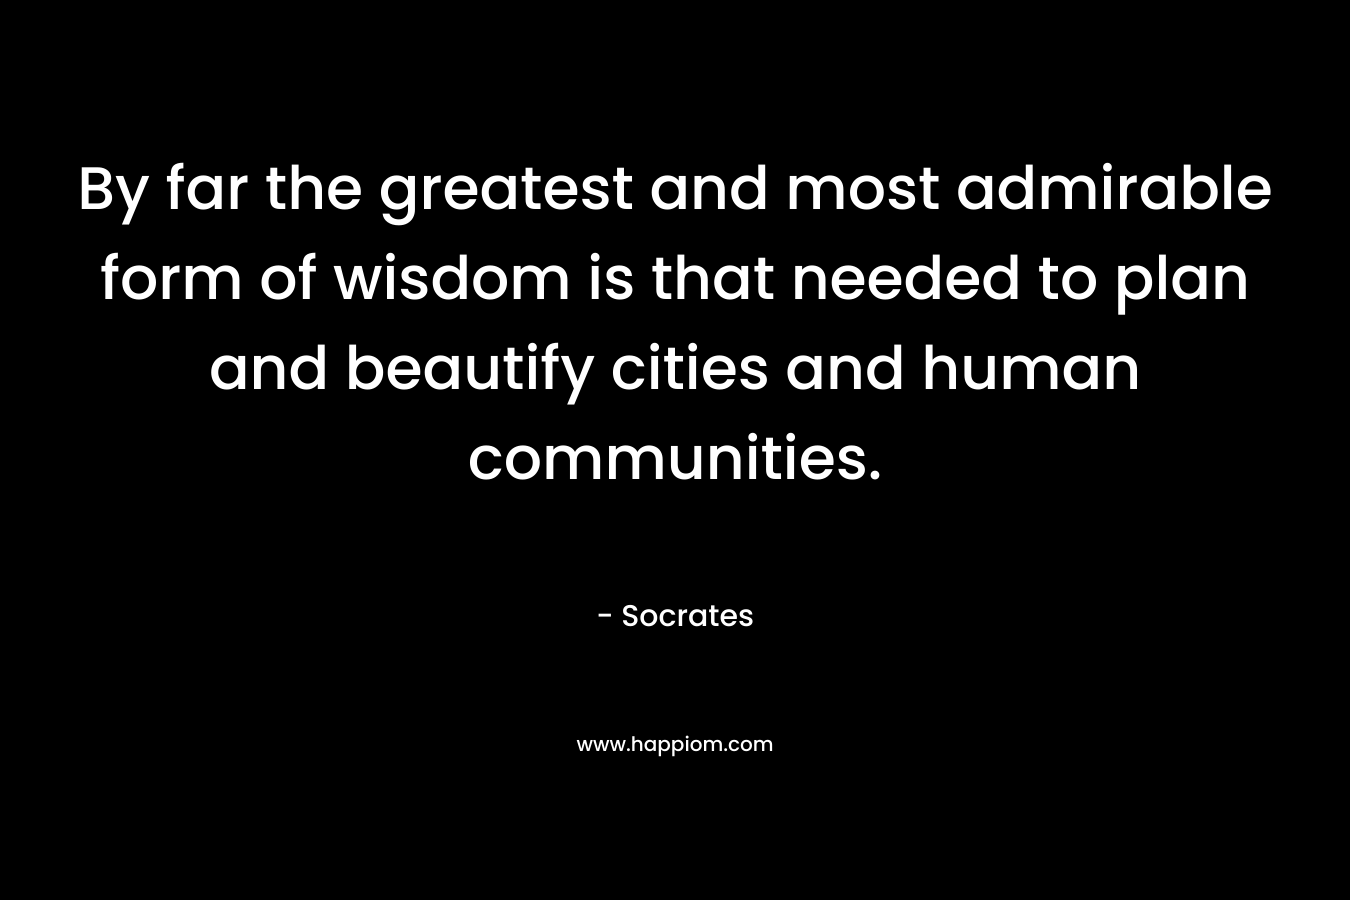 By far the greatest and most admirable form of wisdom is that needed to plan and beautify cities and human communities. – Socrates